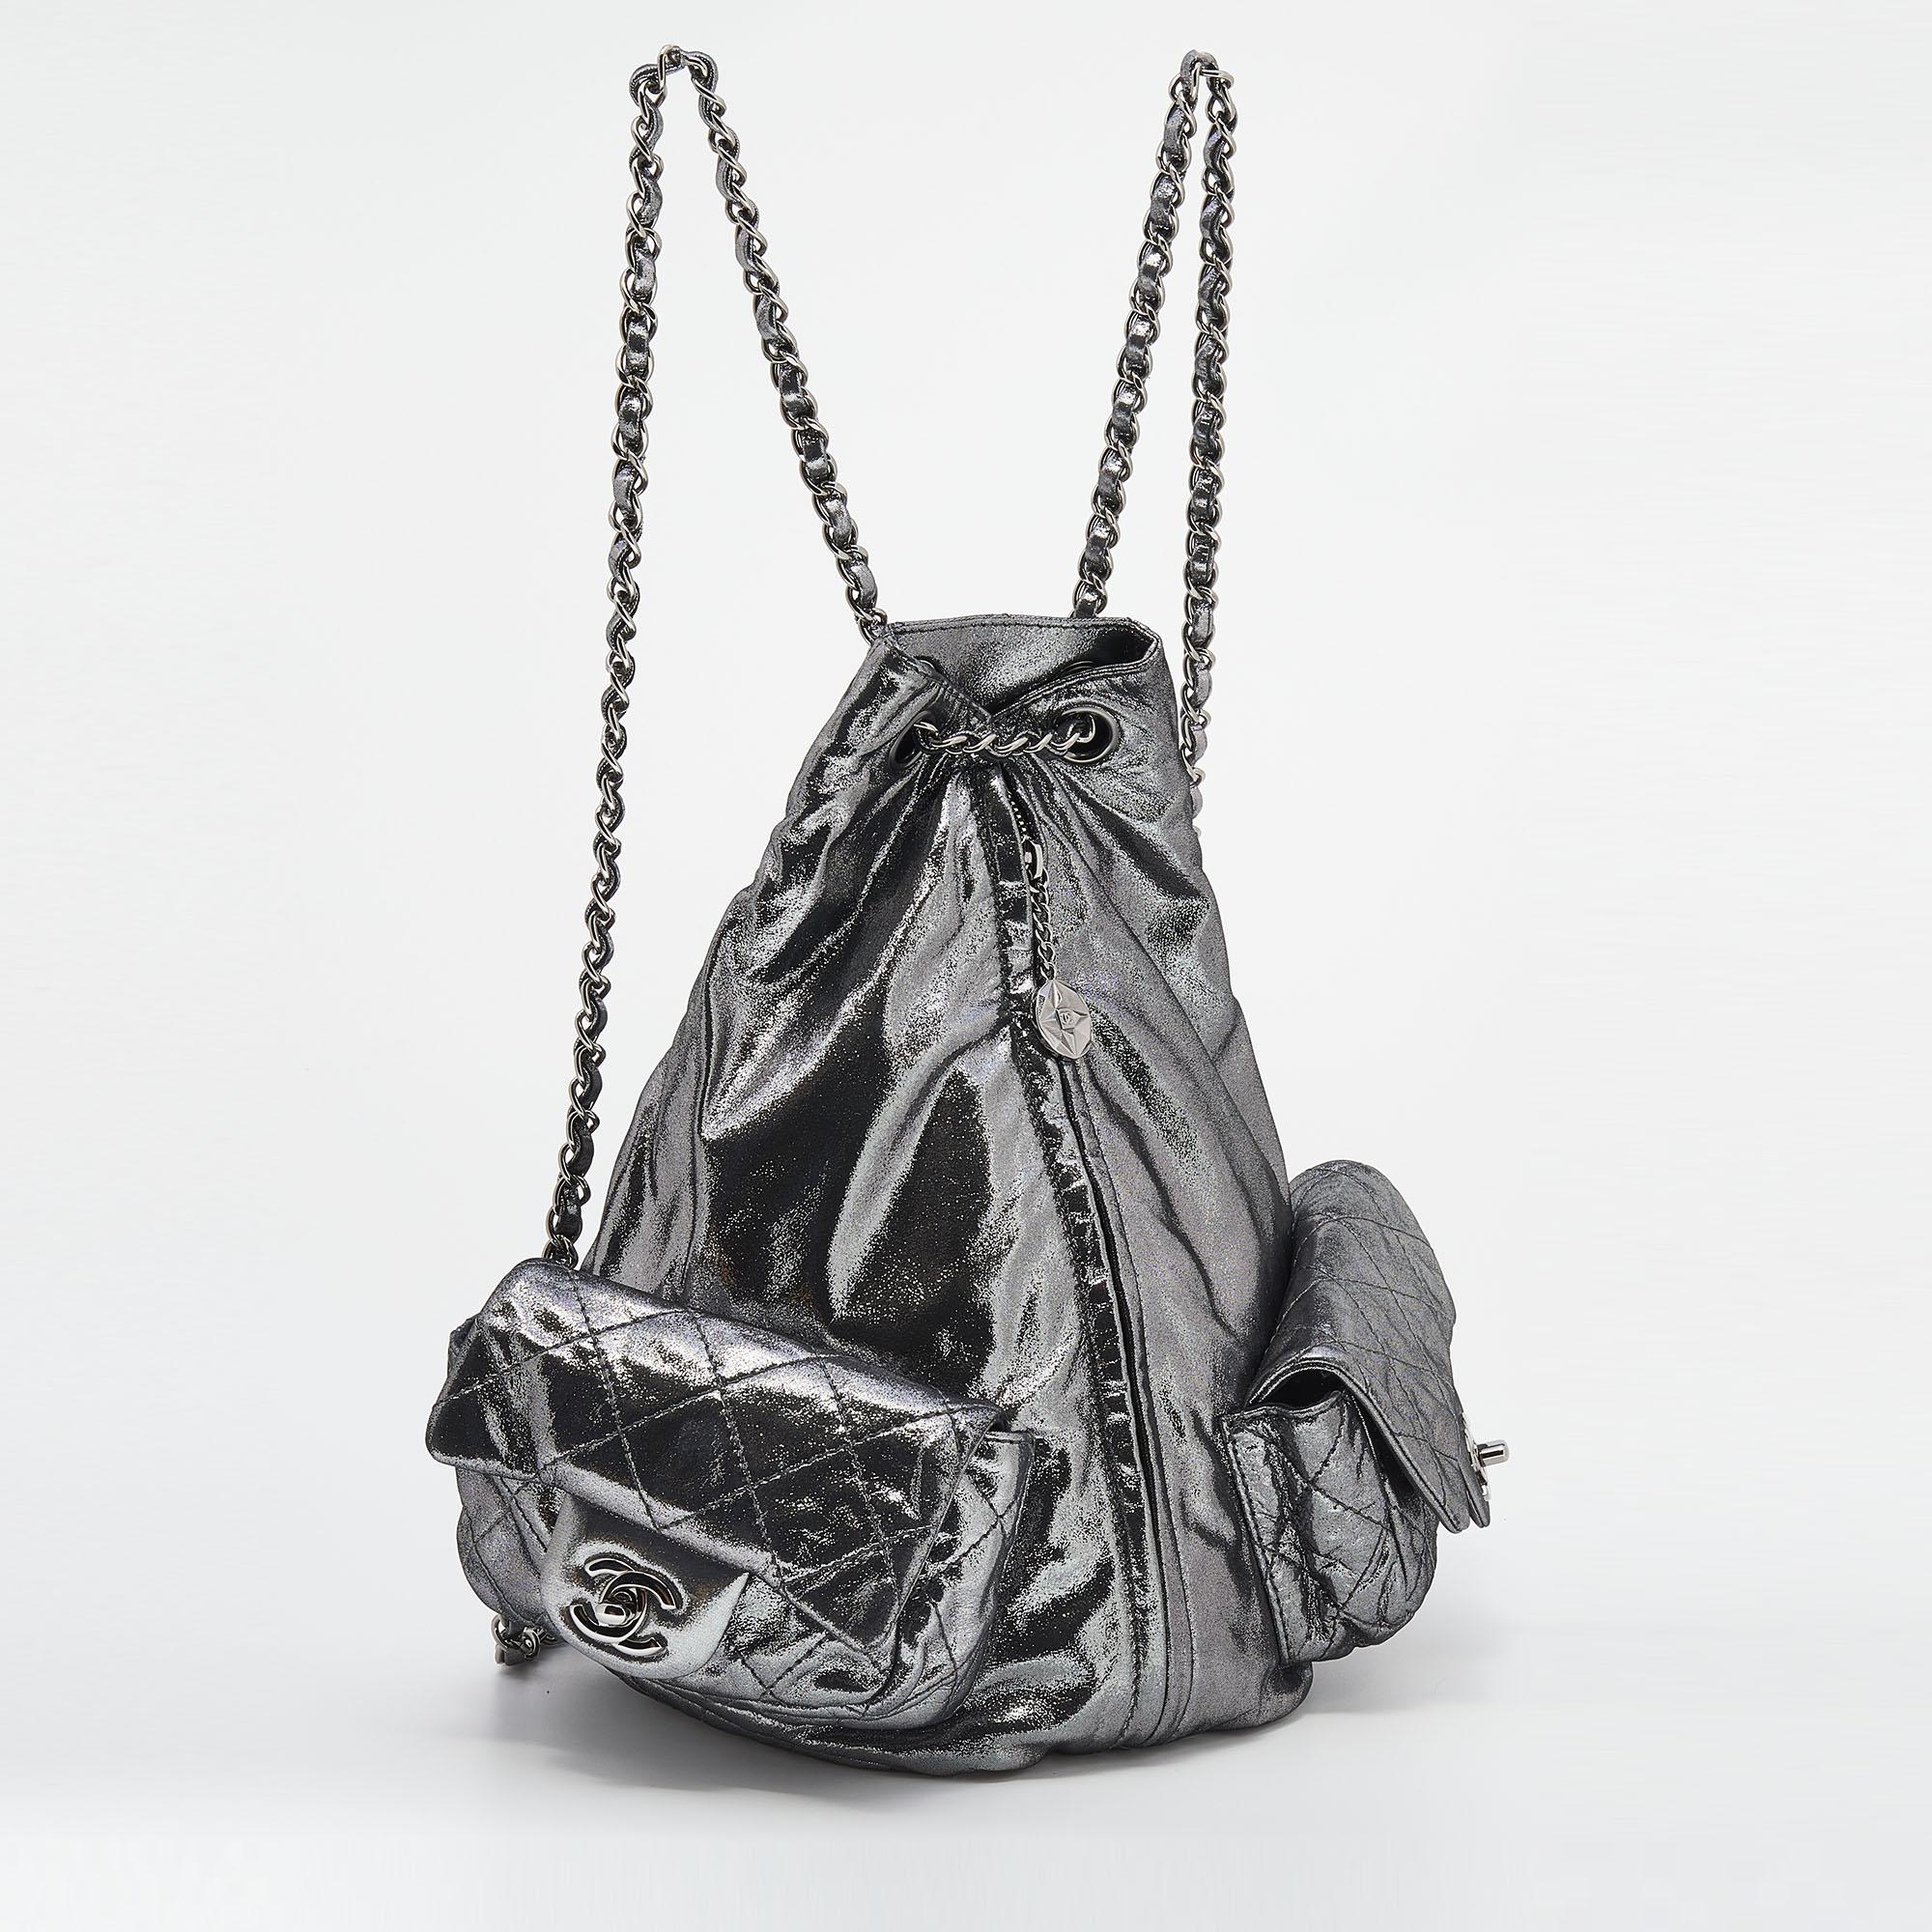 Women's Chanel Metallic Dark Silver Quilted Leather Large Backpack is Back Backpack